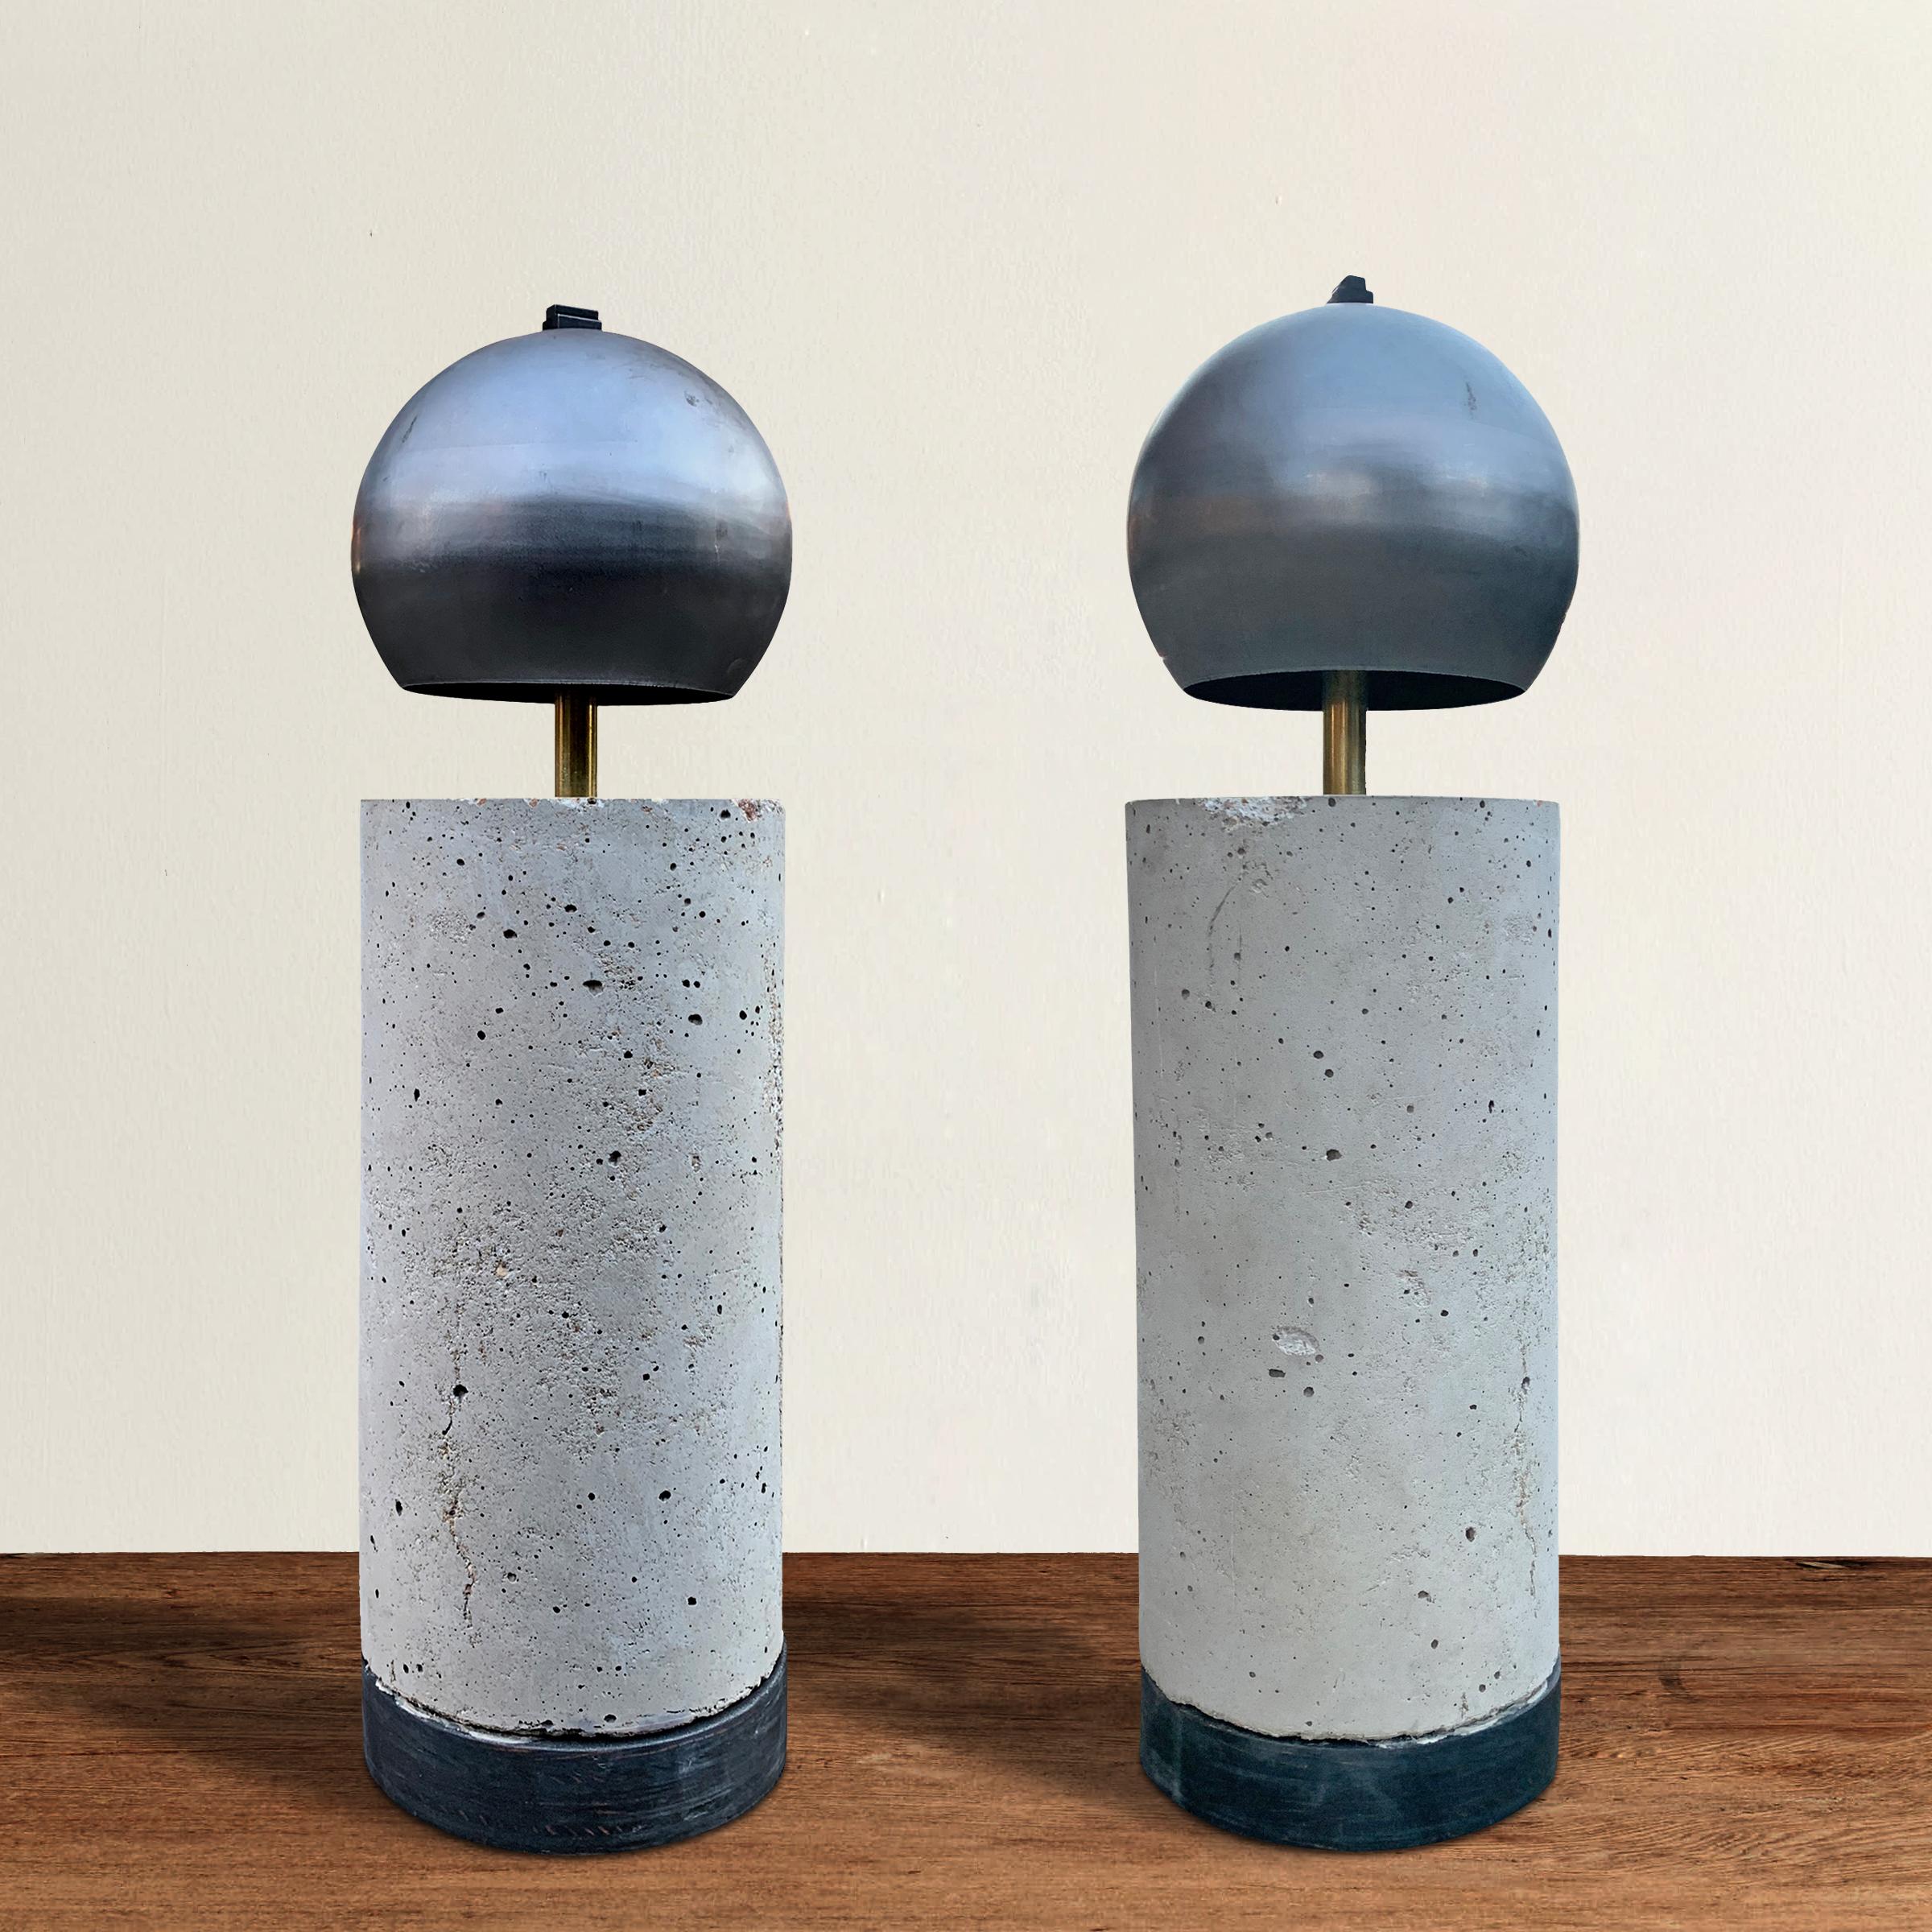 A sharp pair of contemporary American artist-made table lamps designed with a Brutalist spirit, and constructed with steel dome shades, cylindrical cement bodies, with wood bases. Electrified for US with two LED bulbs each.